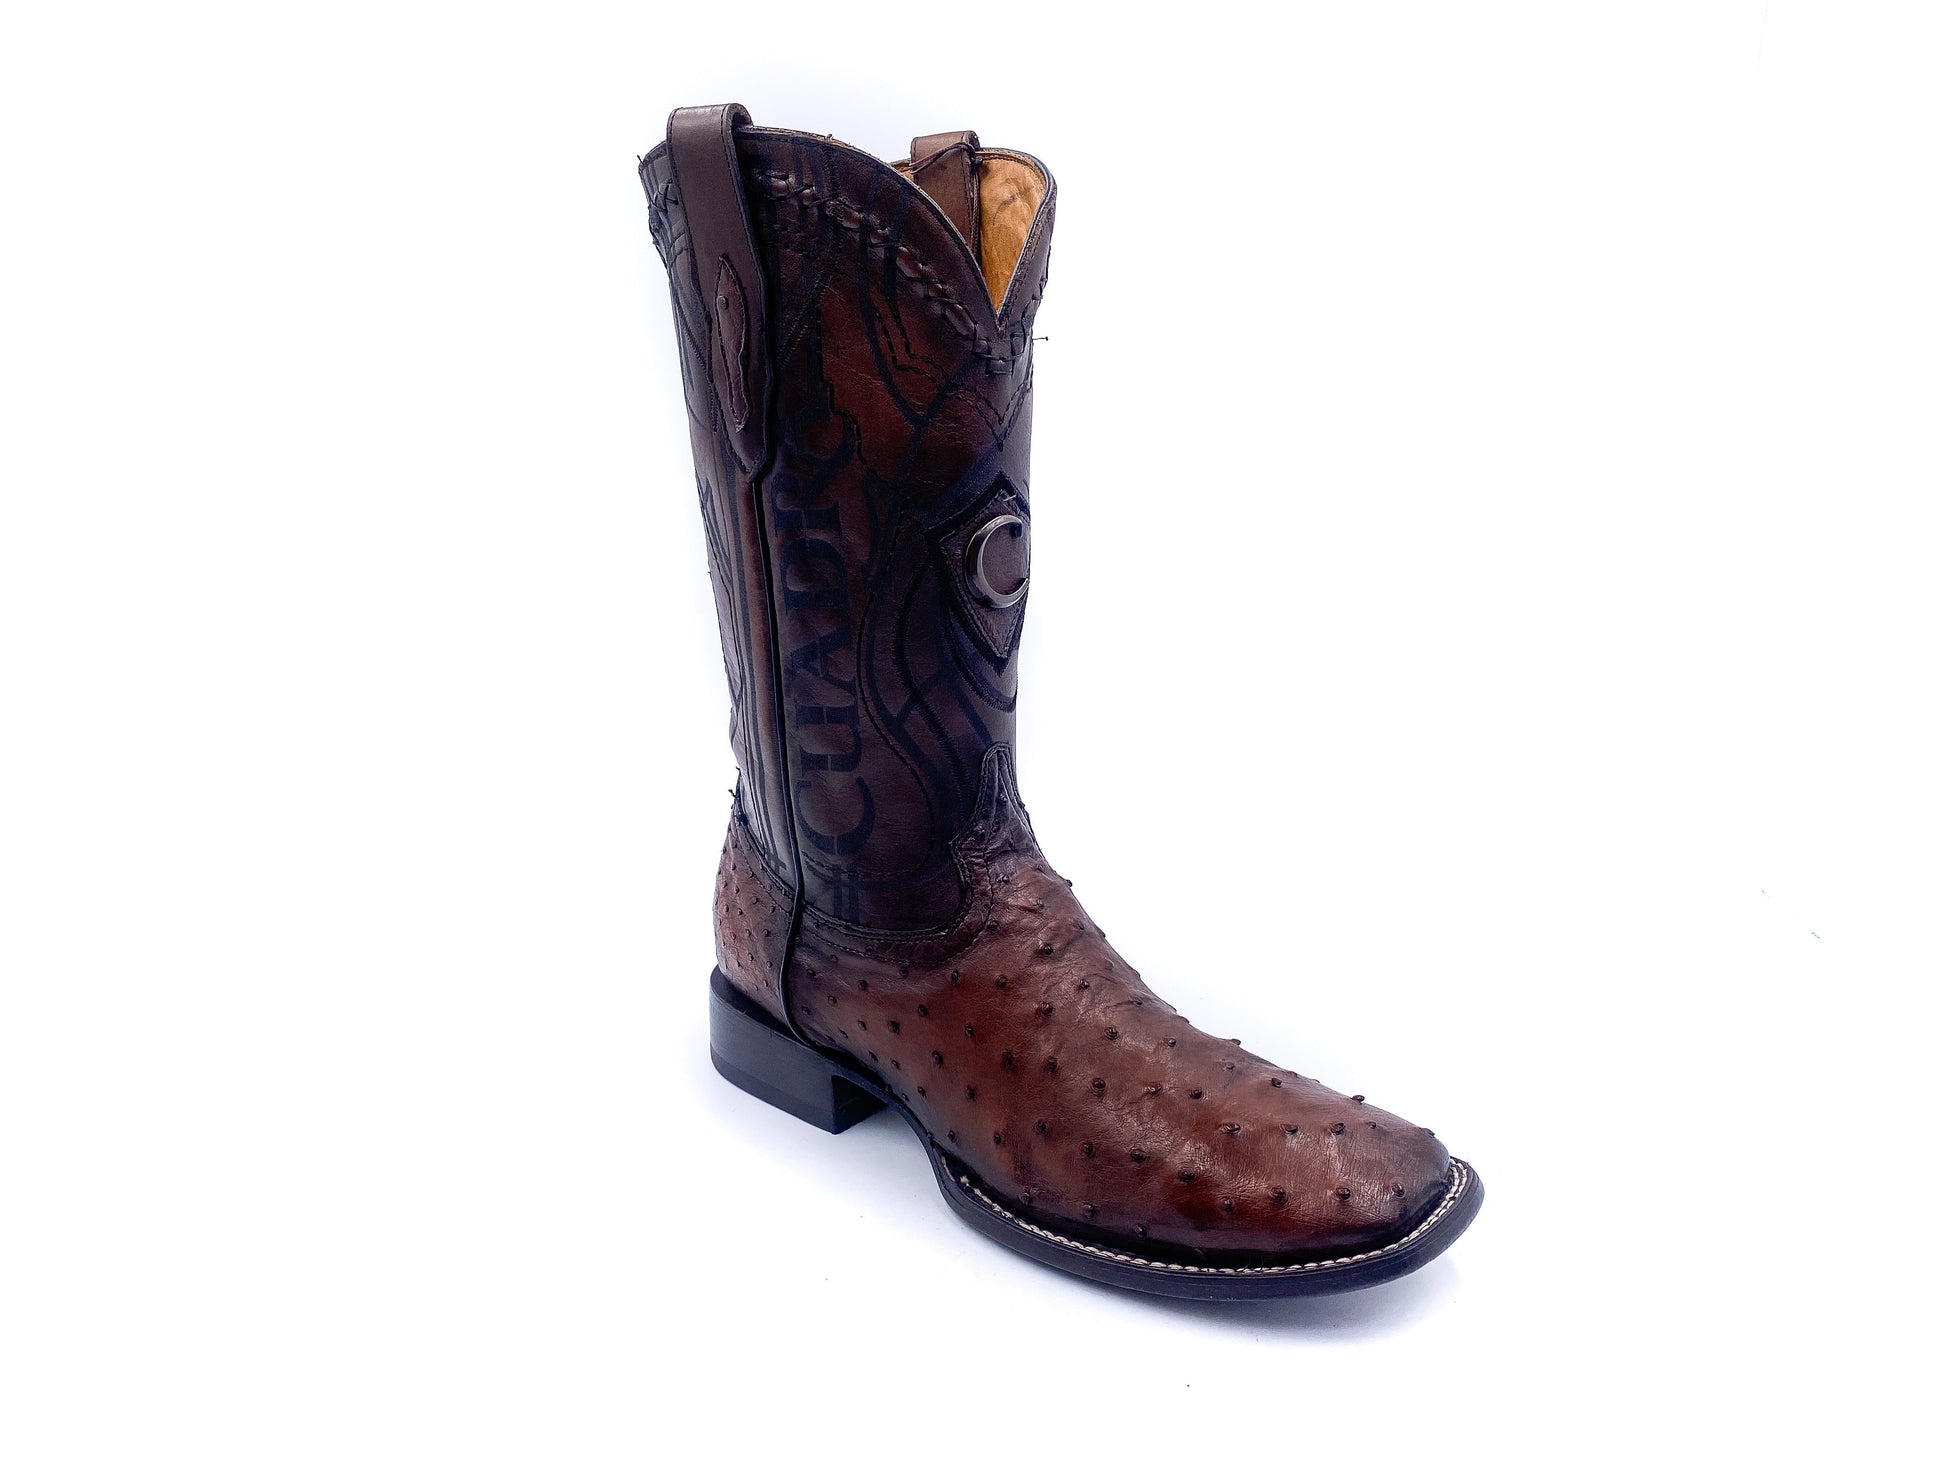 3Z1OA1 - Cuadra tobacco cowboy rodeo ostrich leather boots for men-Kuet.us